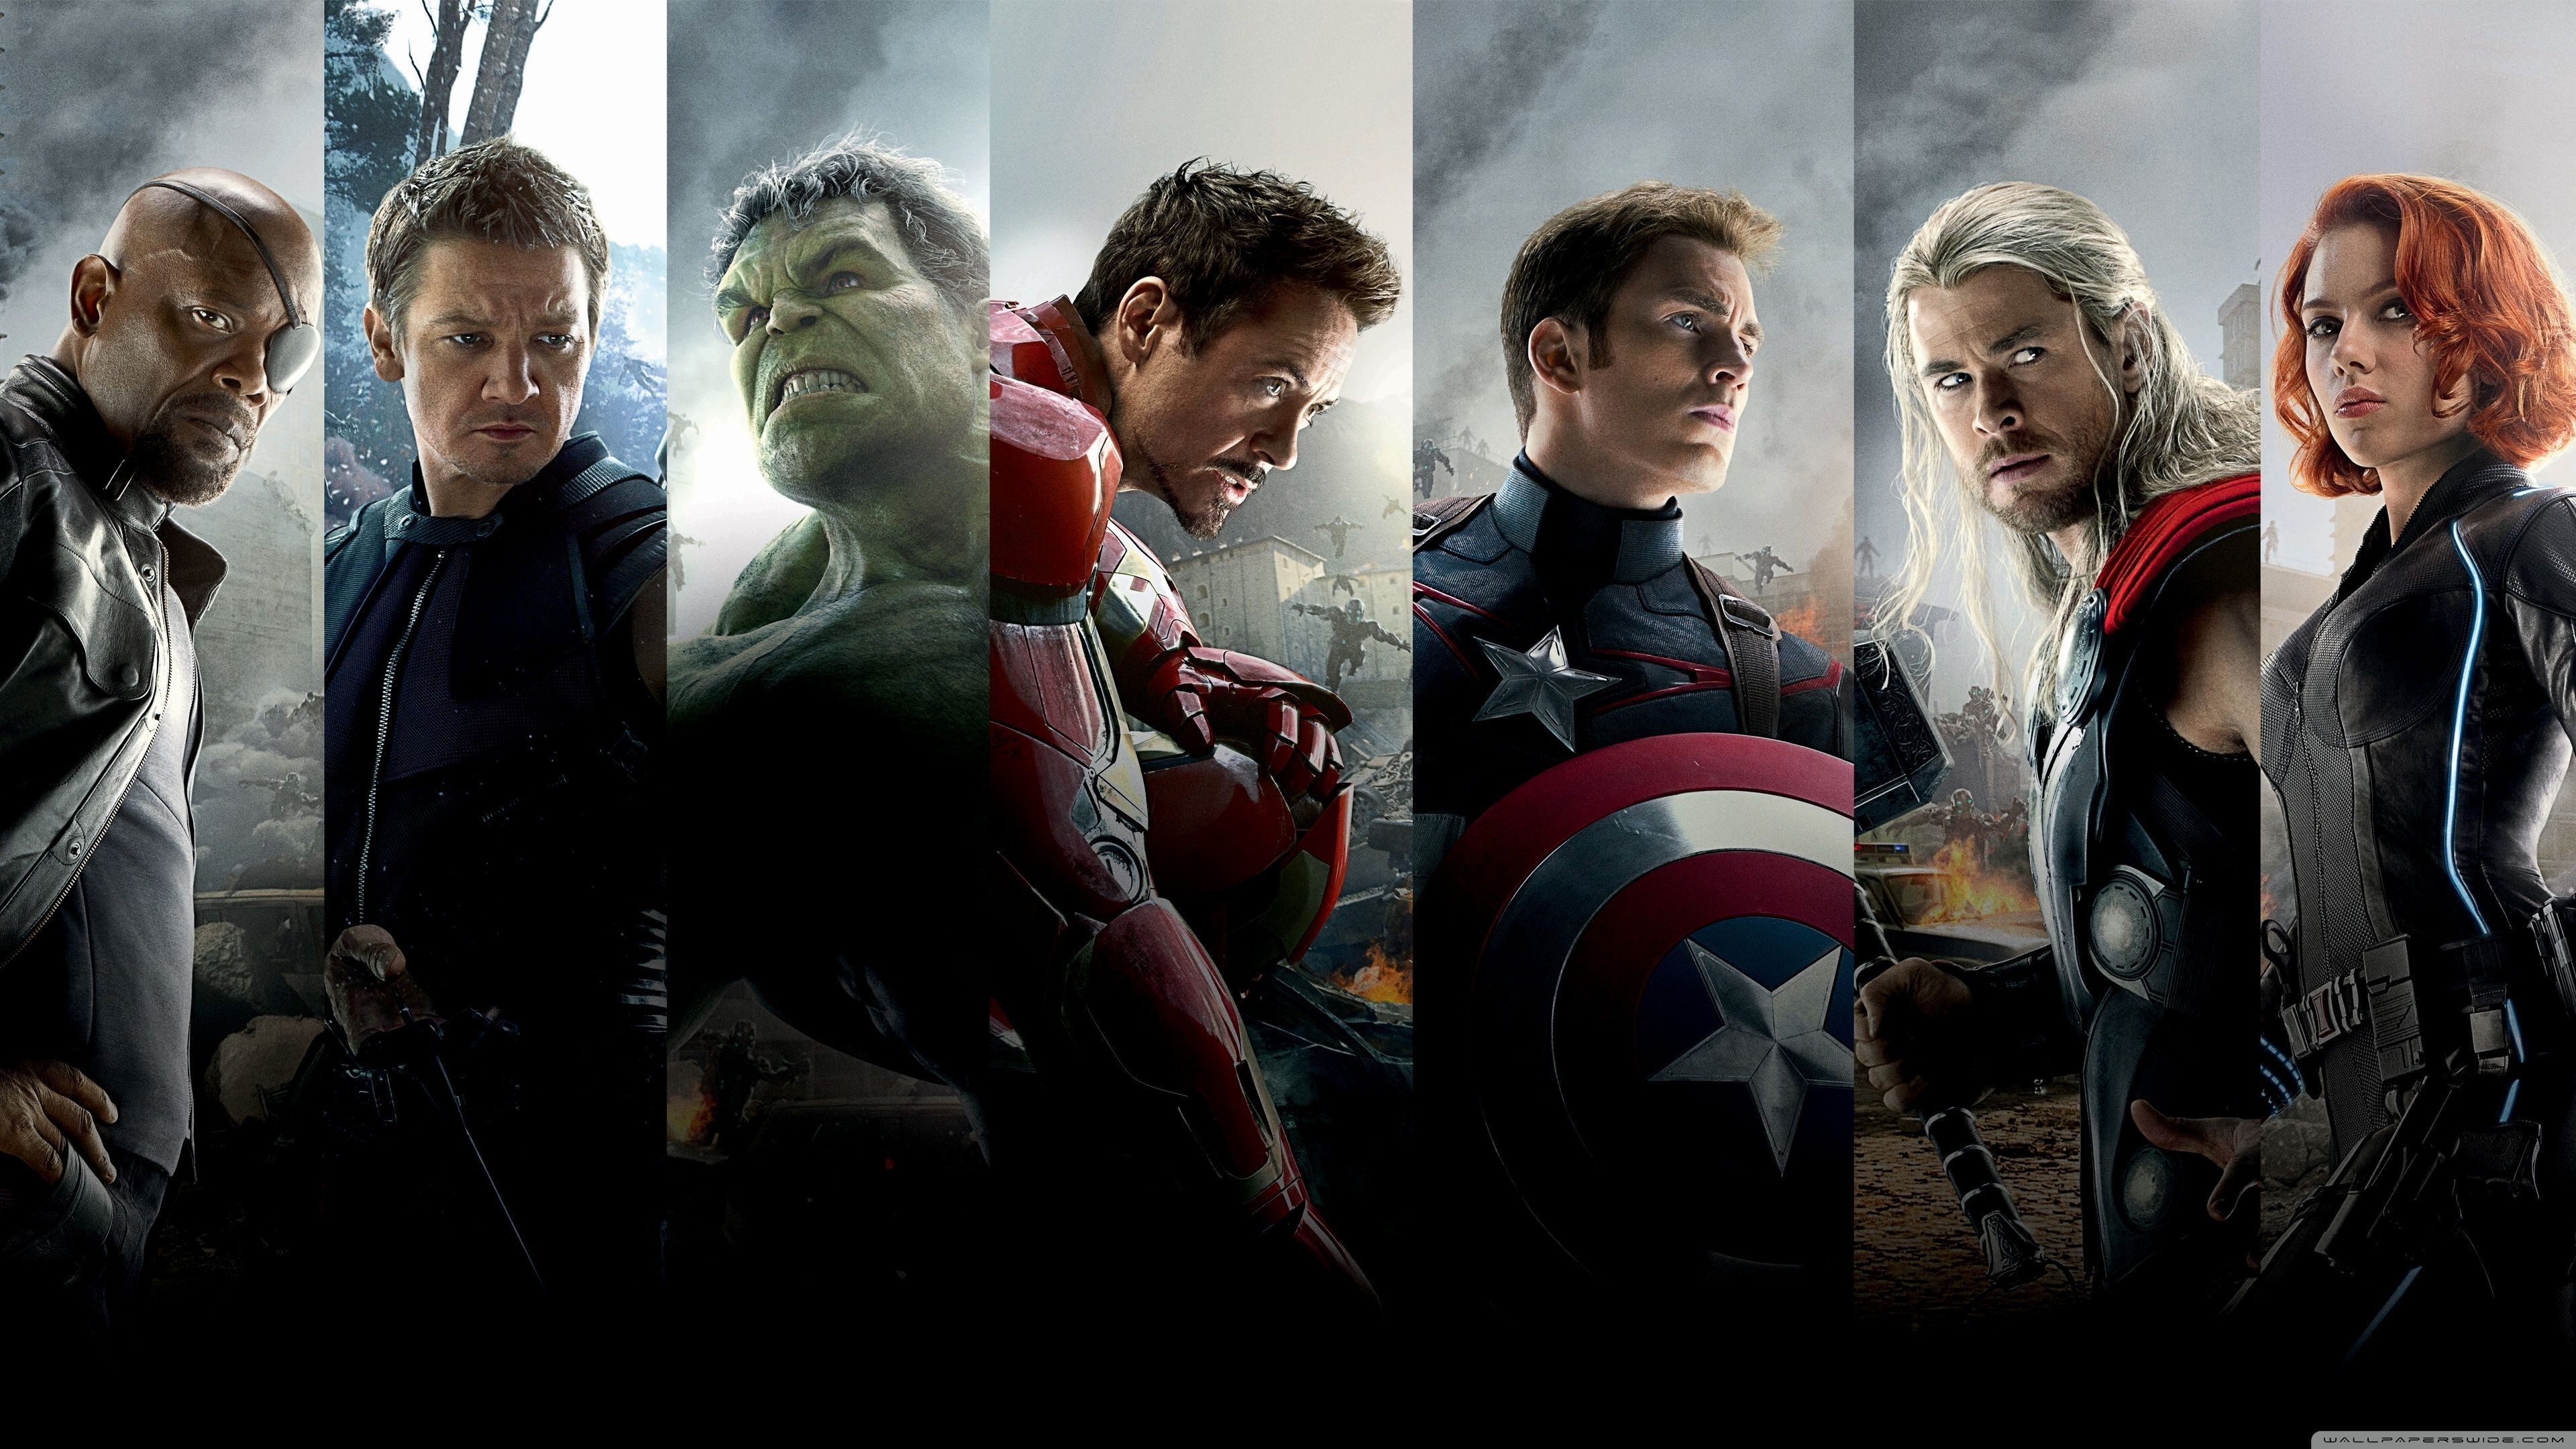 3840x2160 Image result for avengers age of ultron wallpaper hd 1080p